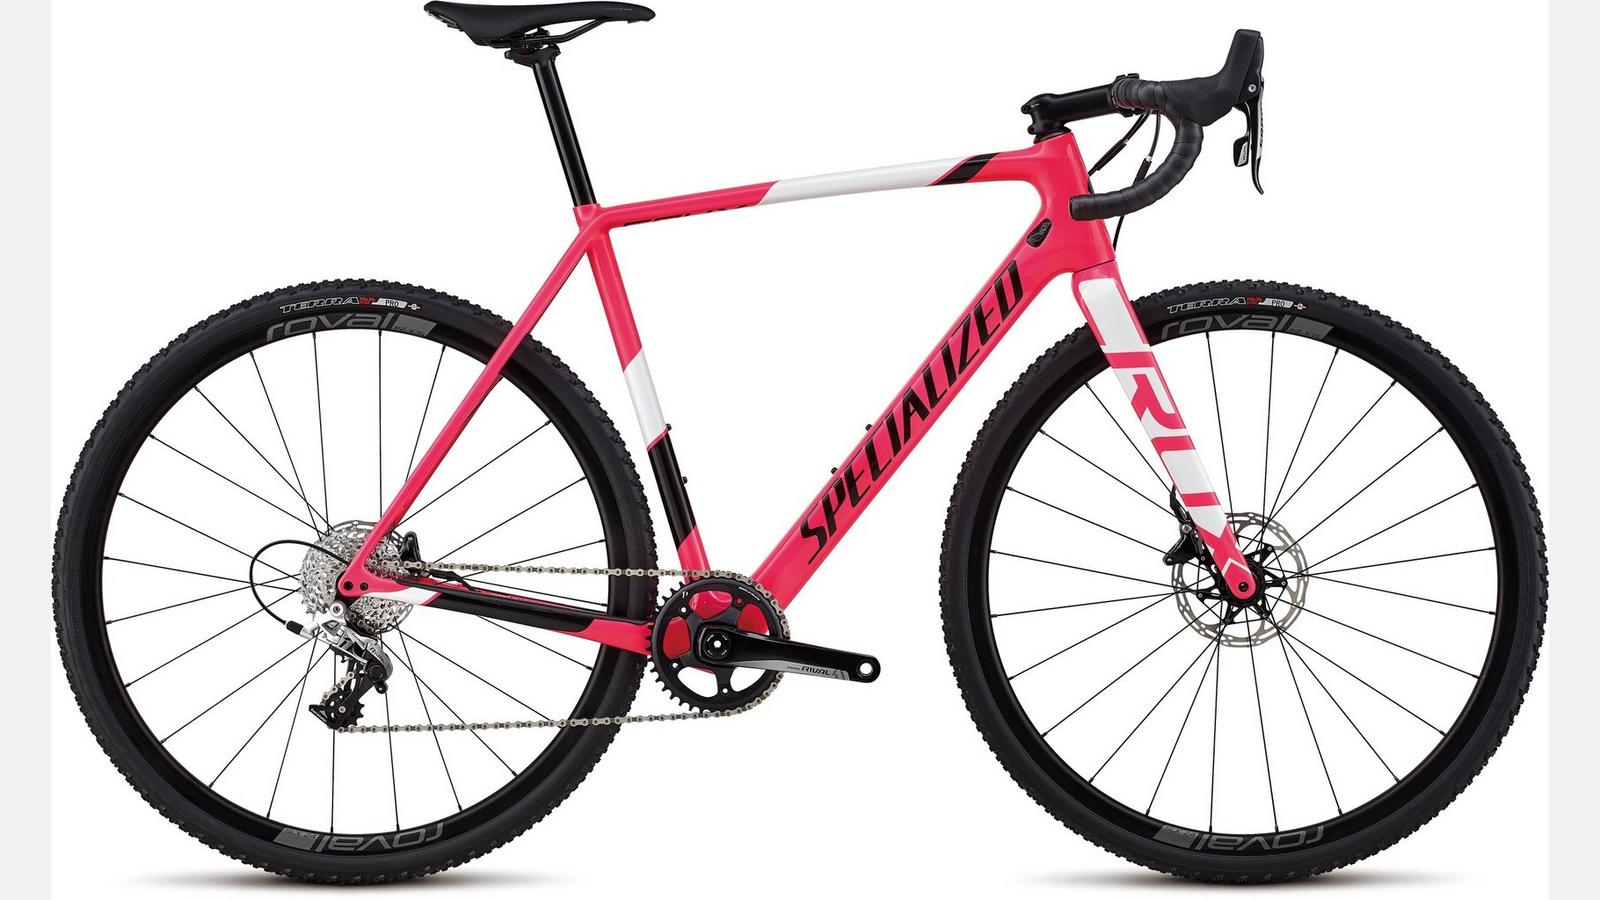 Paint for 2018 Specialized CruX Elite X1 - Gloss Acid Pink